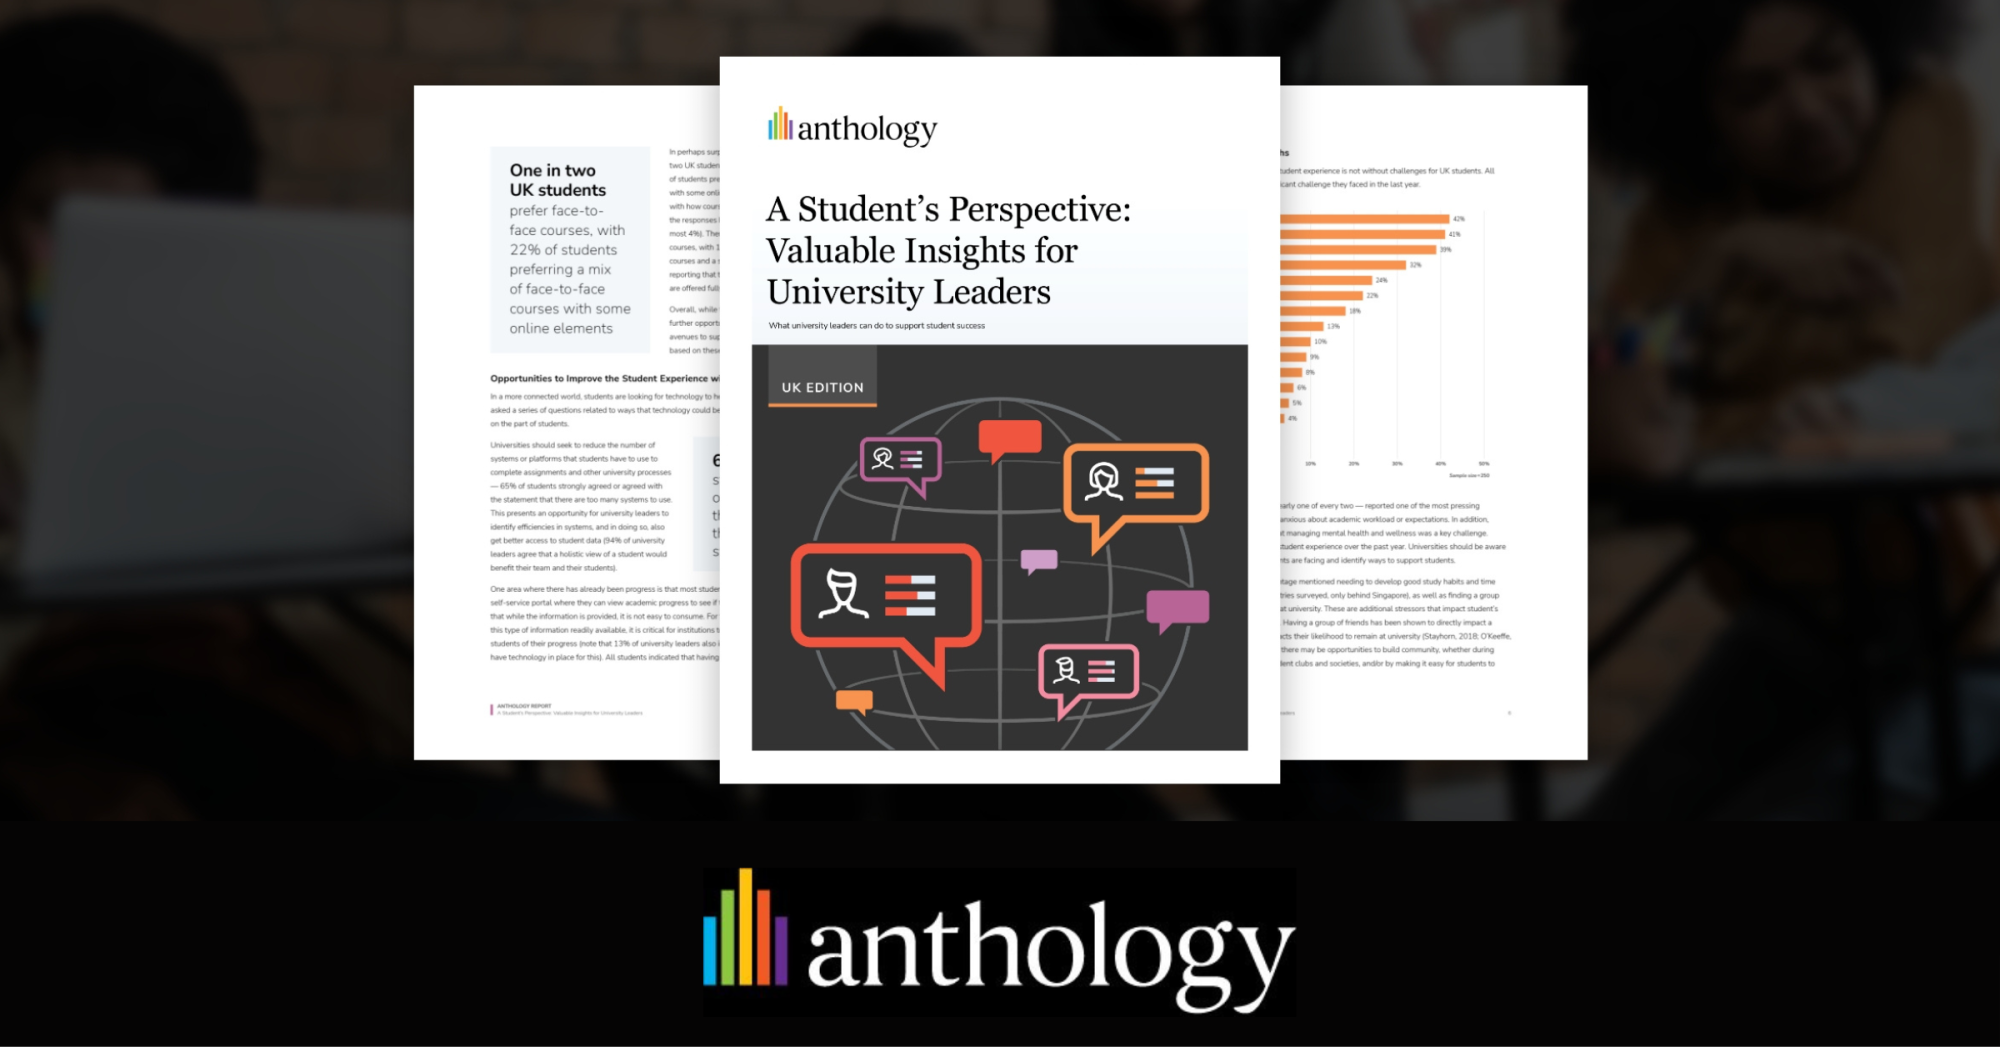 Image related to an Anthology paper called "A Student's Perspective: Valuable Insights for University Leaders.